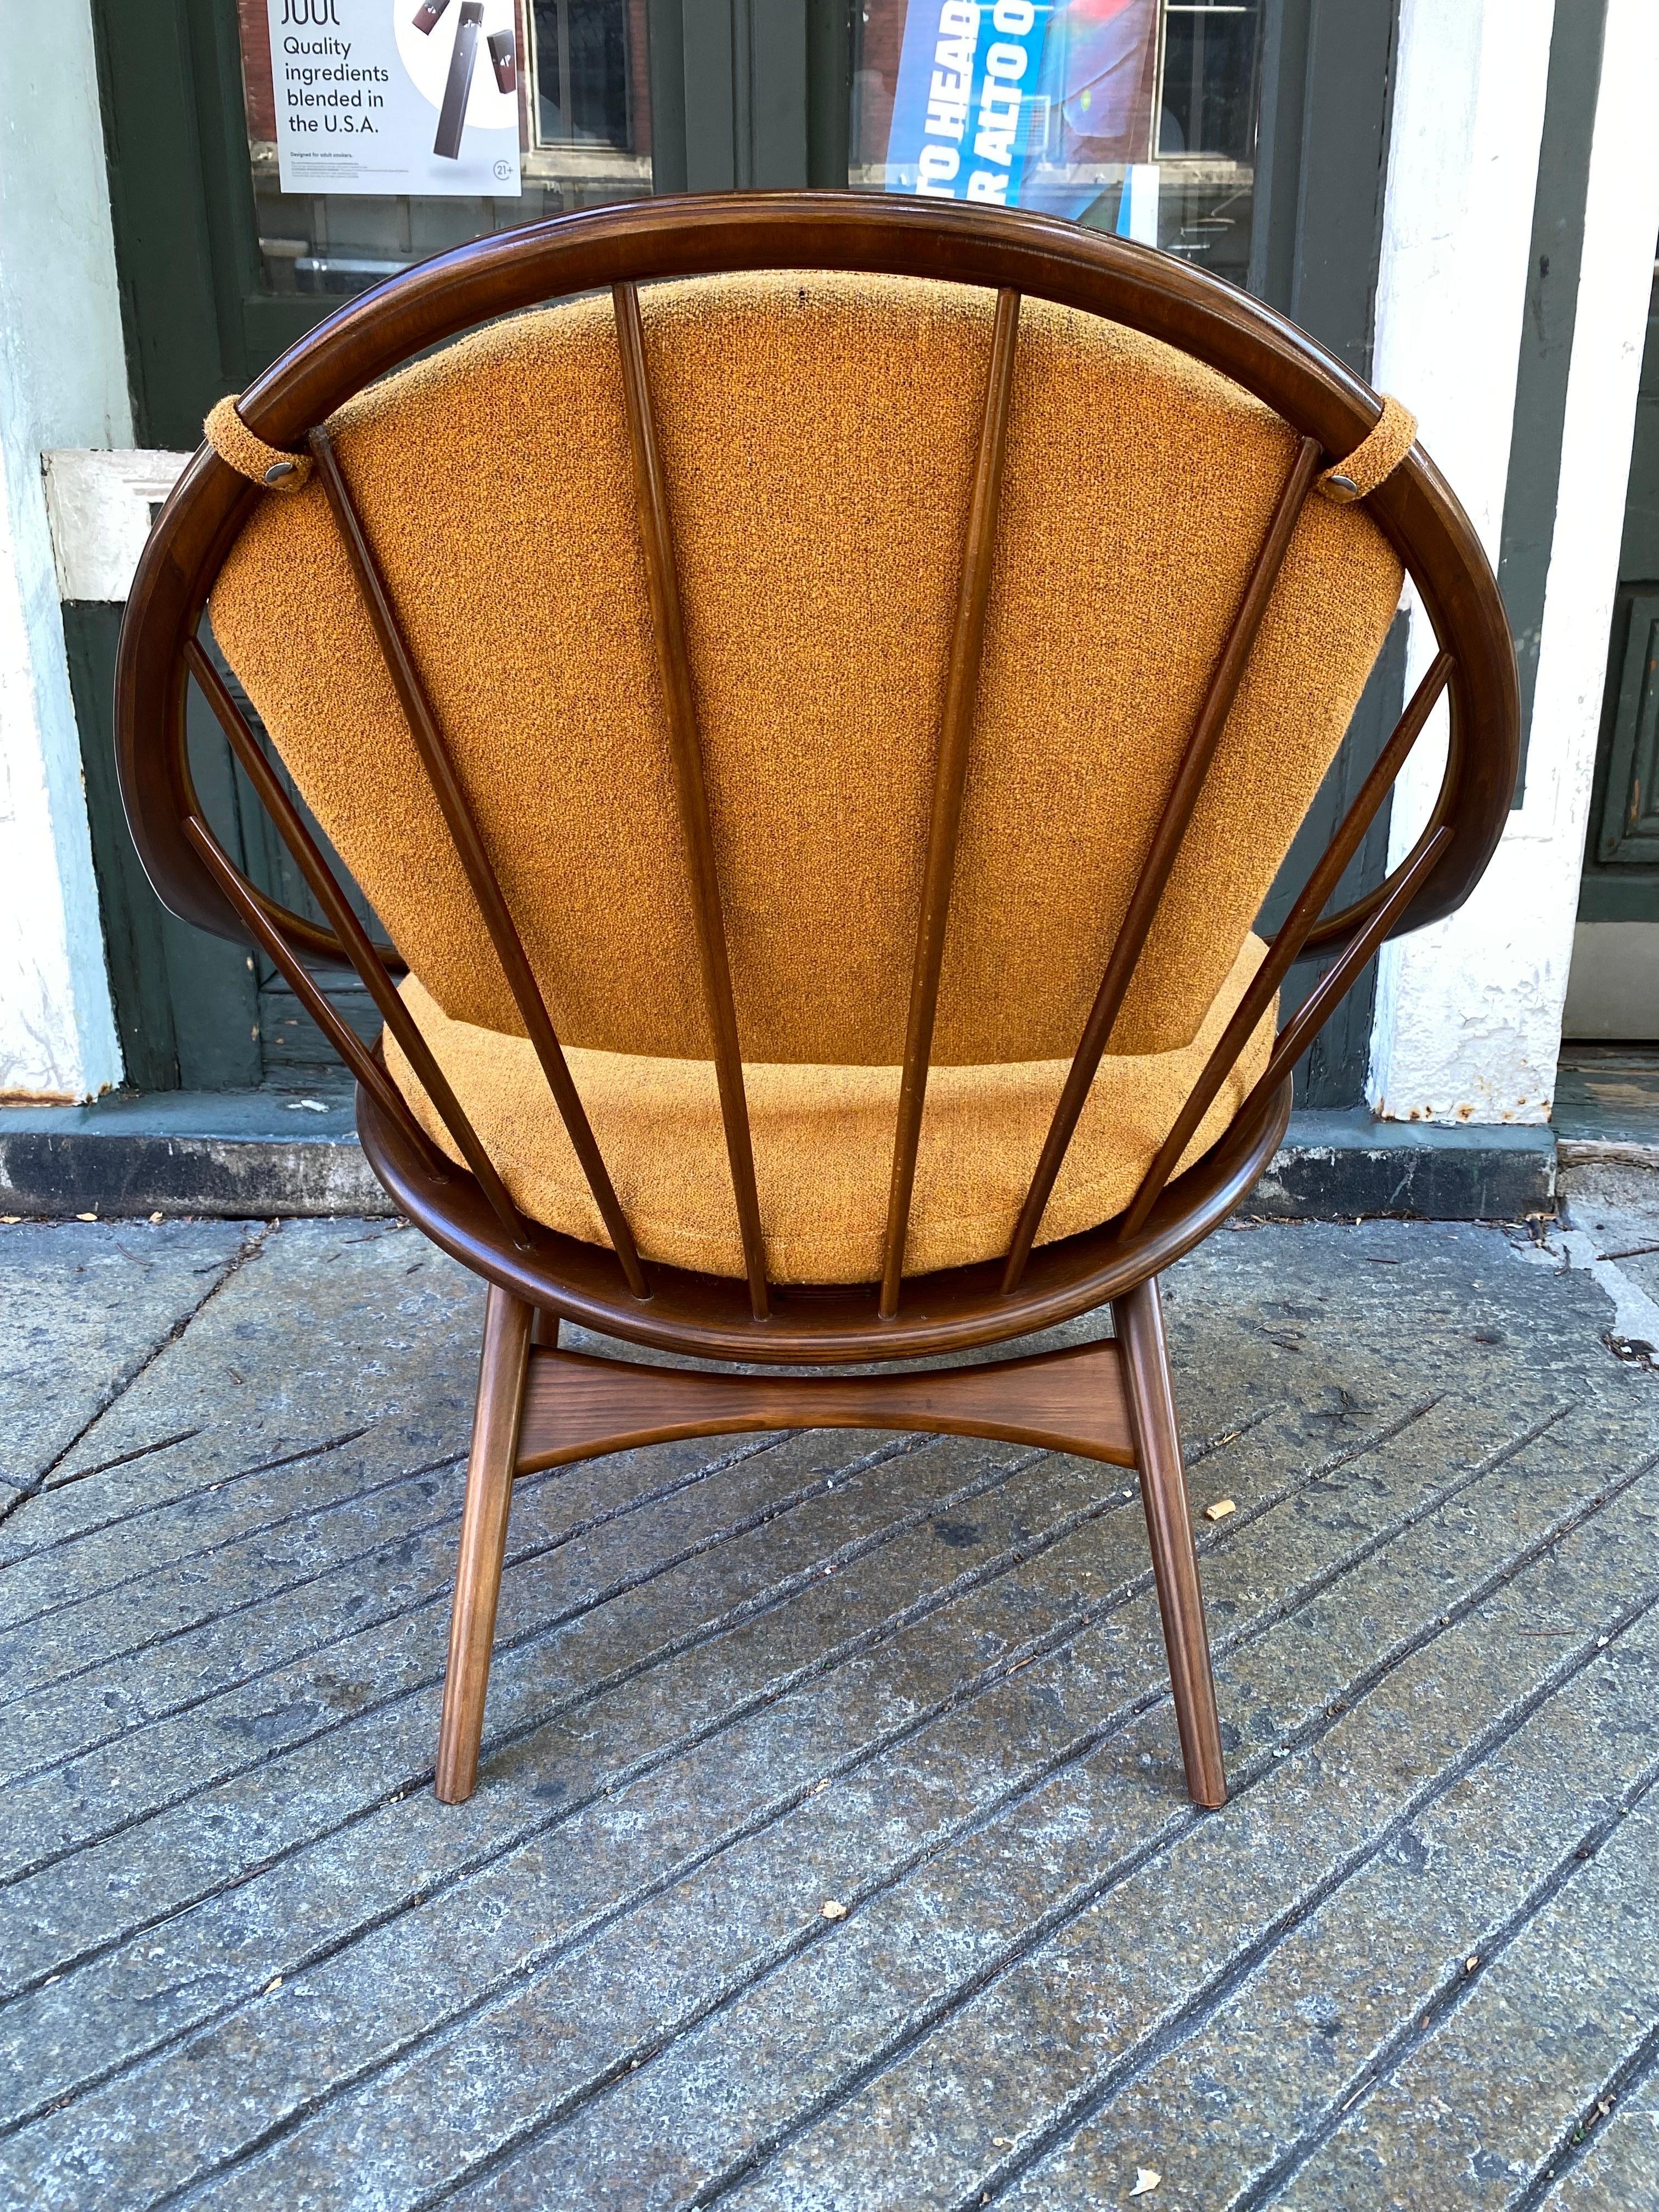 Ib Kofod Larsen Hoop Bentwood Lounge Chair.  Reupholstered about 10 years ago, and still in nice shape.  Looks good from every angle and comfortable!